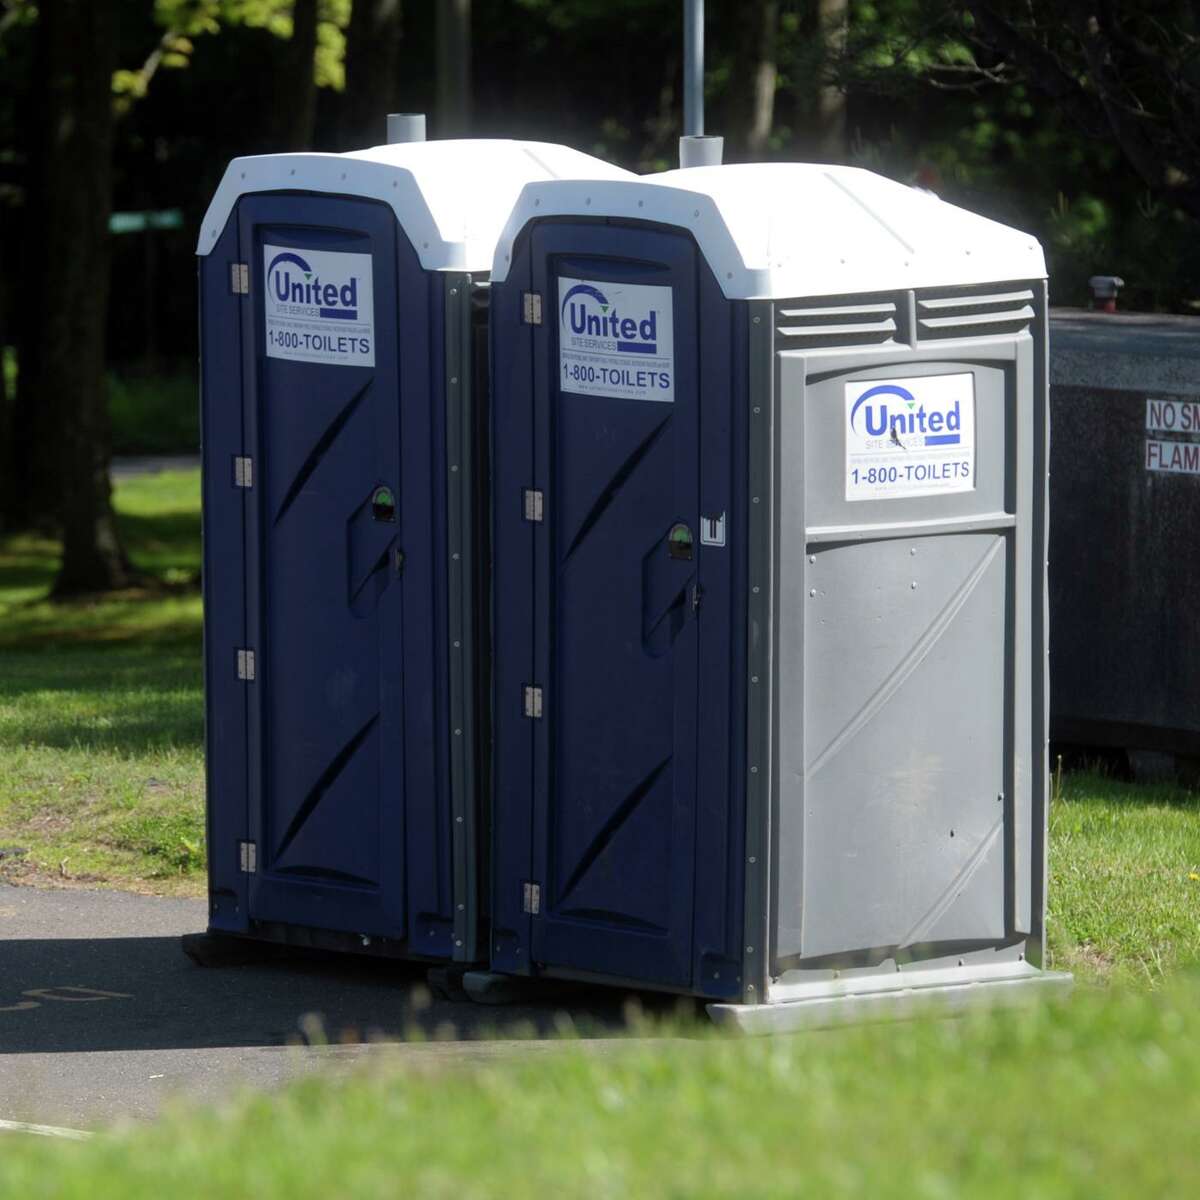 The portable toilets stationed at Shelton police headquarters have become the center of a complaint filed by the police union against the city.